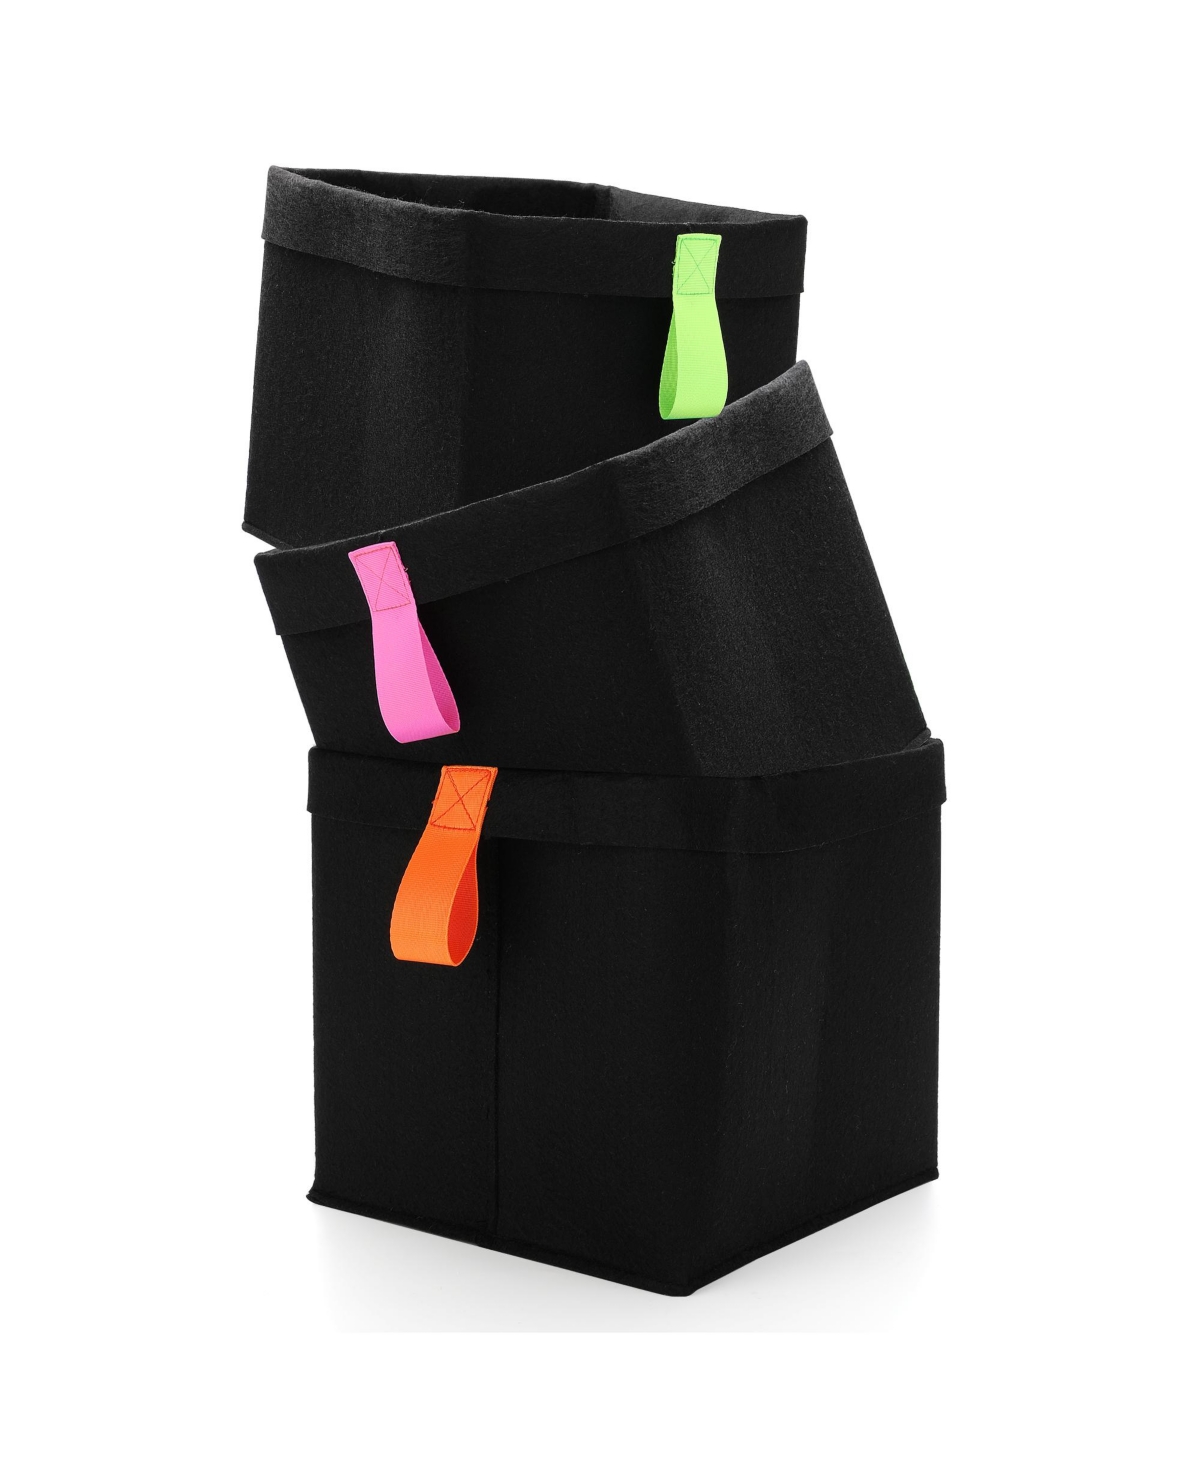 3 Piece Collapsible Square Storage Bins with Assorted Colored Handles - Black